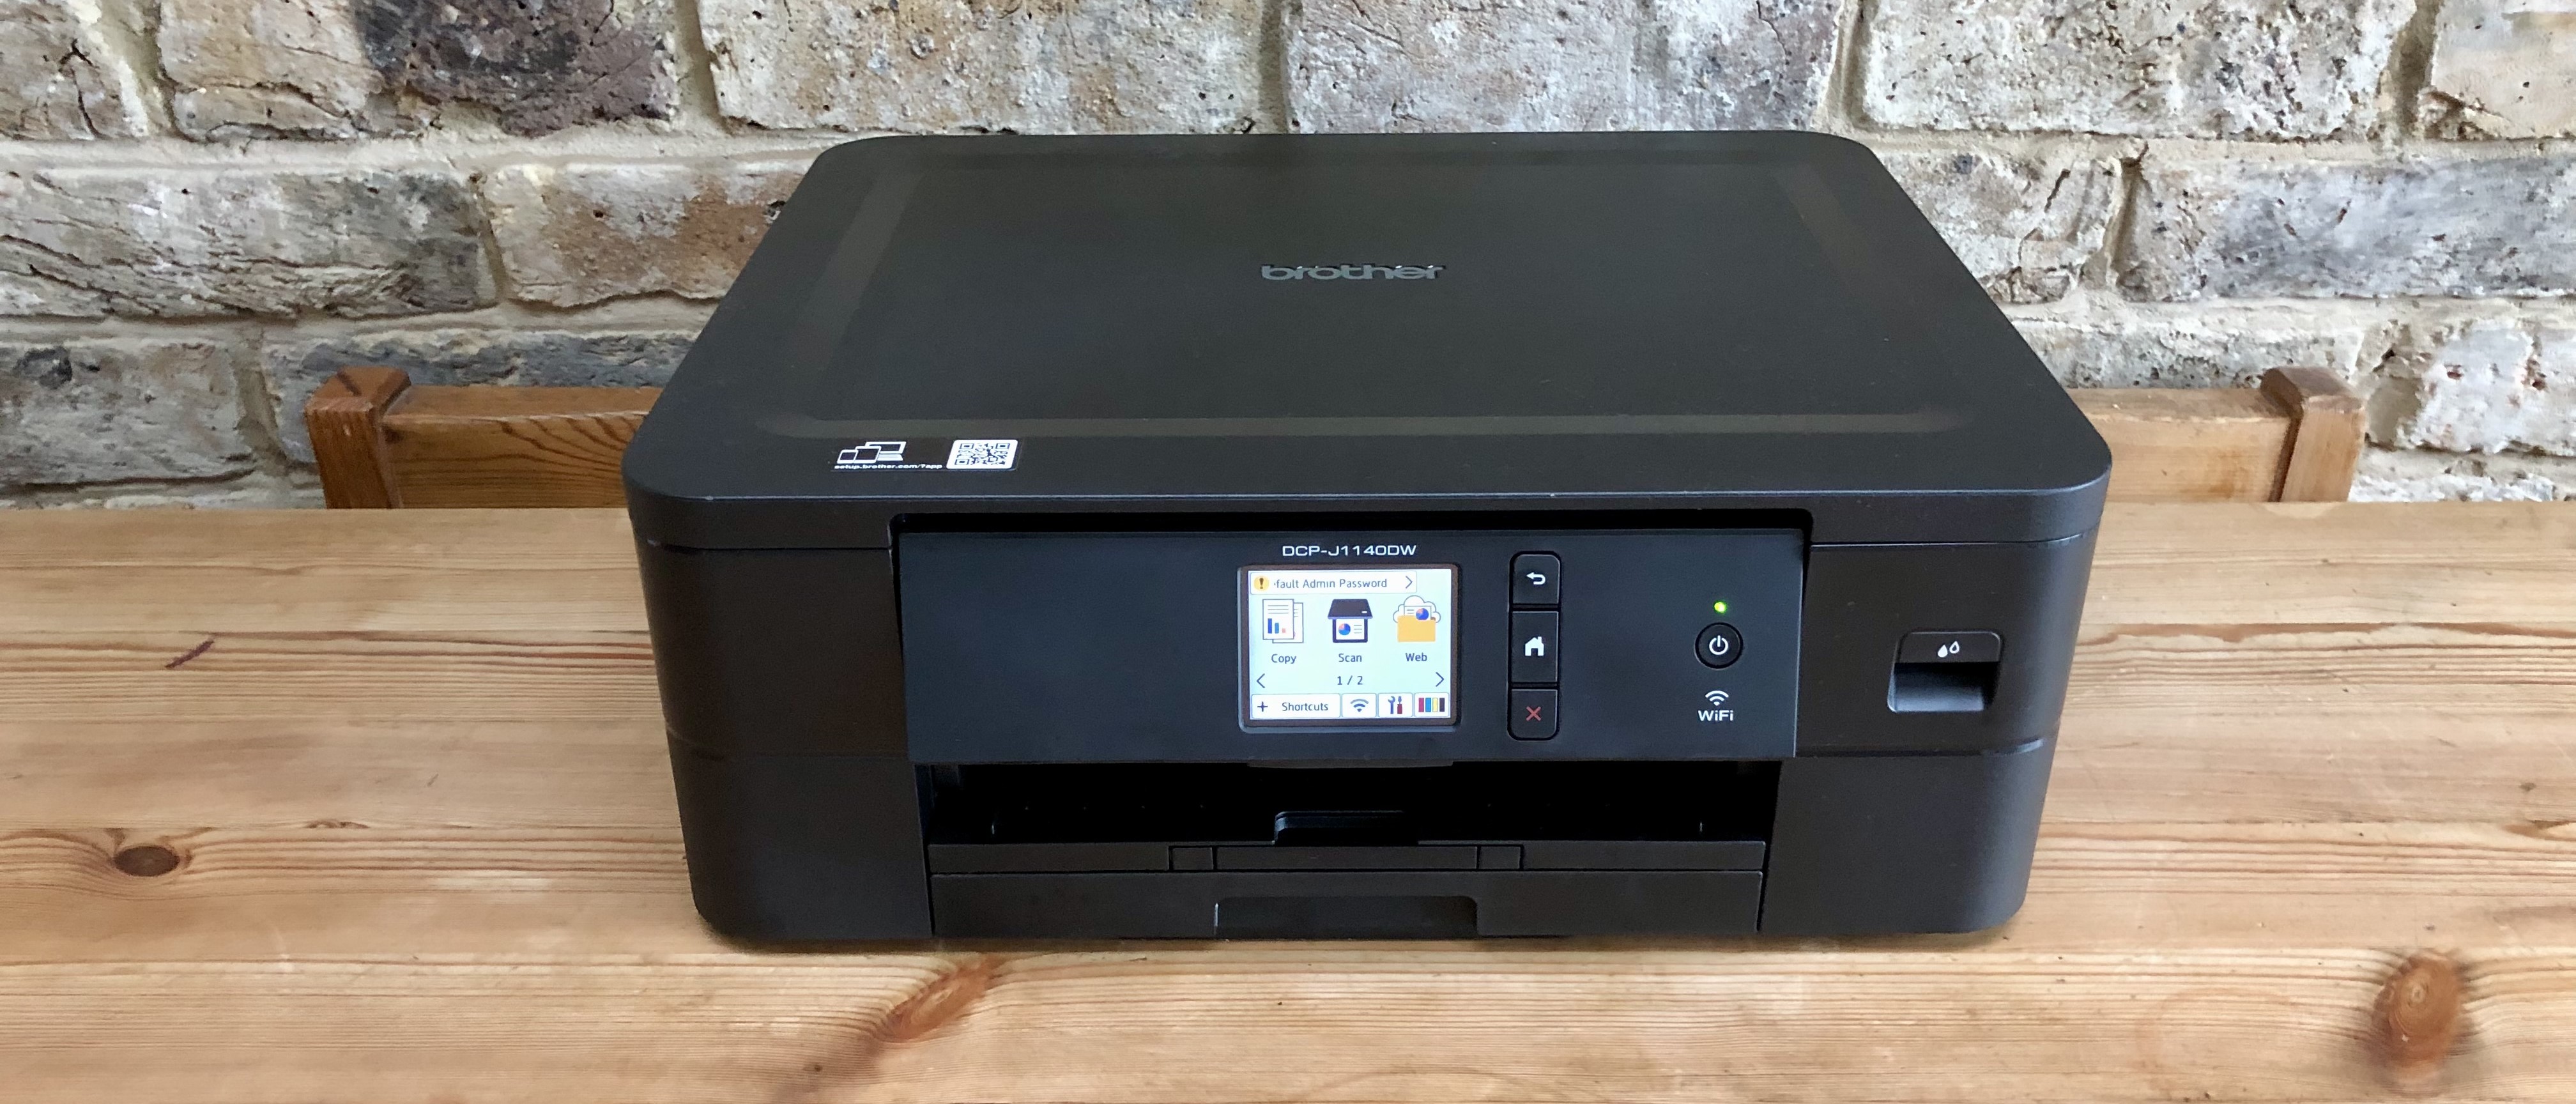 Brother DCP-J1140DW 3-in-1 multifunction printer review | TechRadar